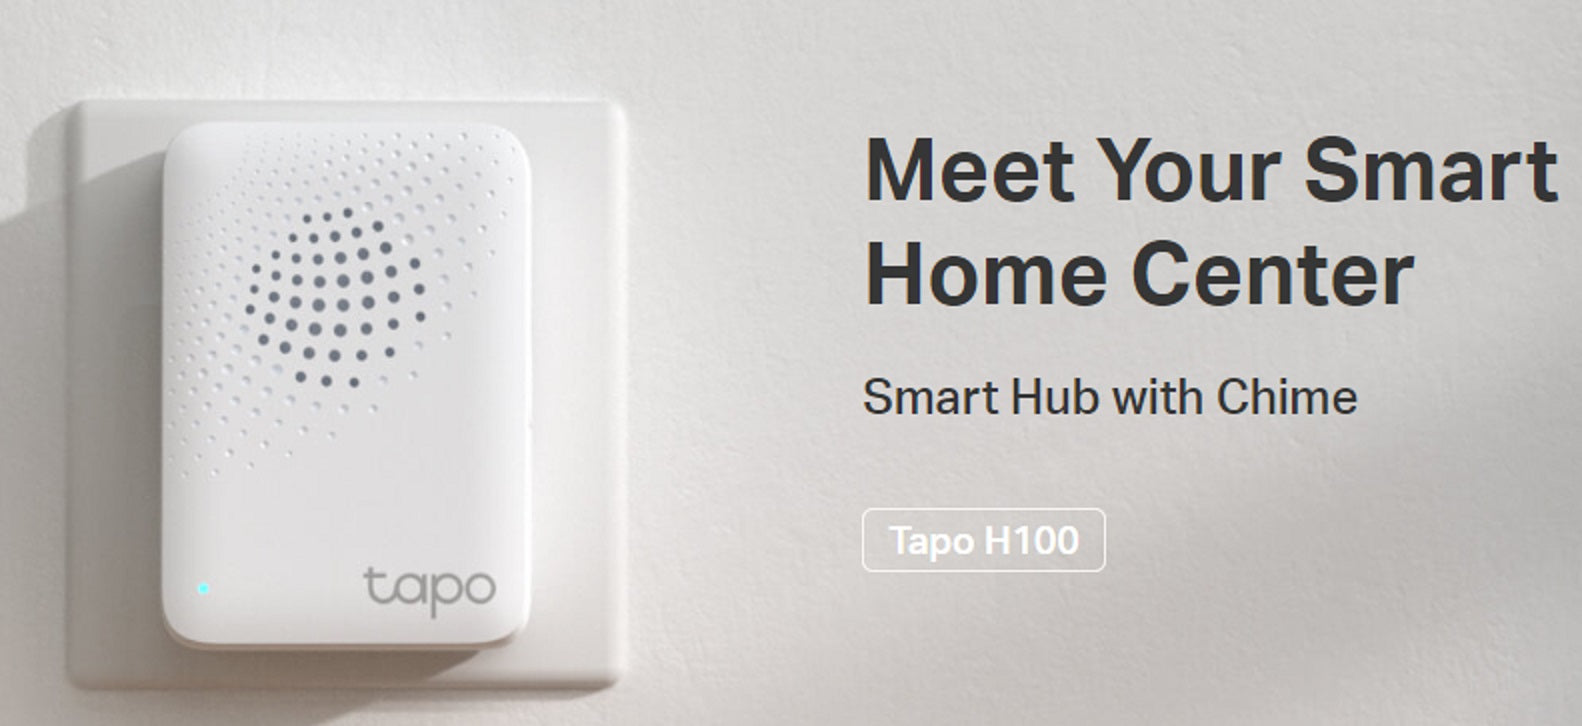 TP-Link Tapo H100 Tapo Smart IoT Hub Smart Doorbell with Chime